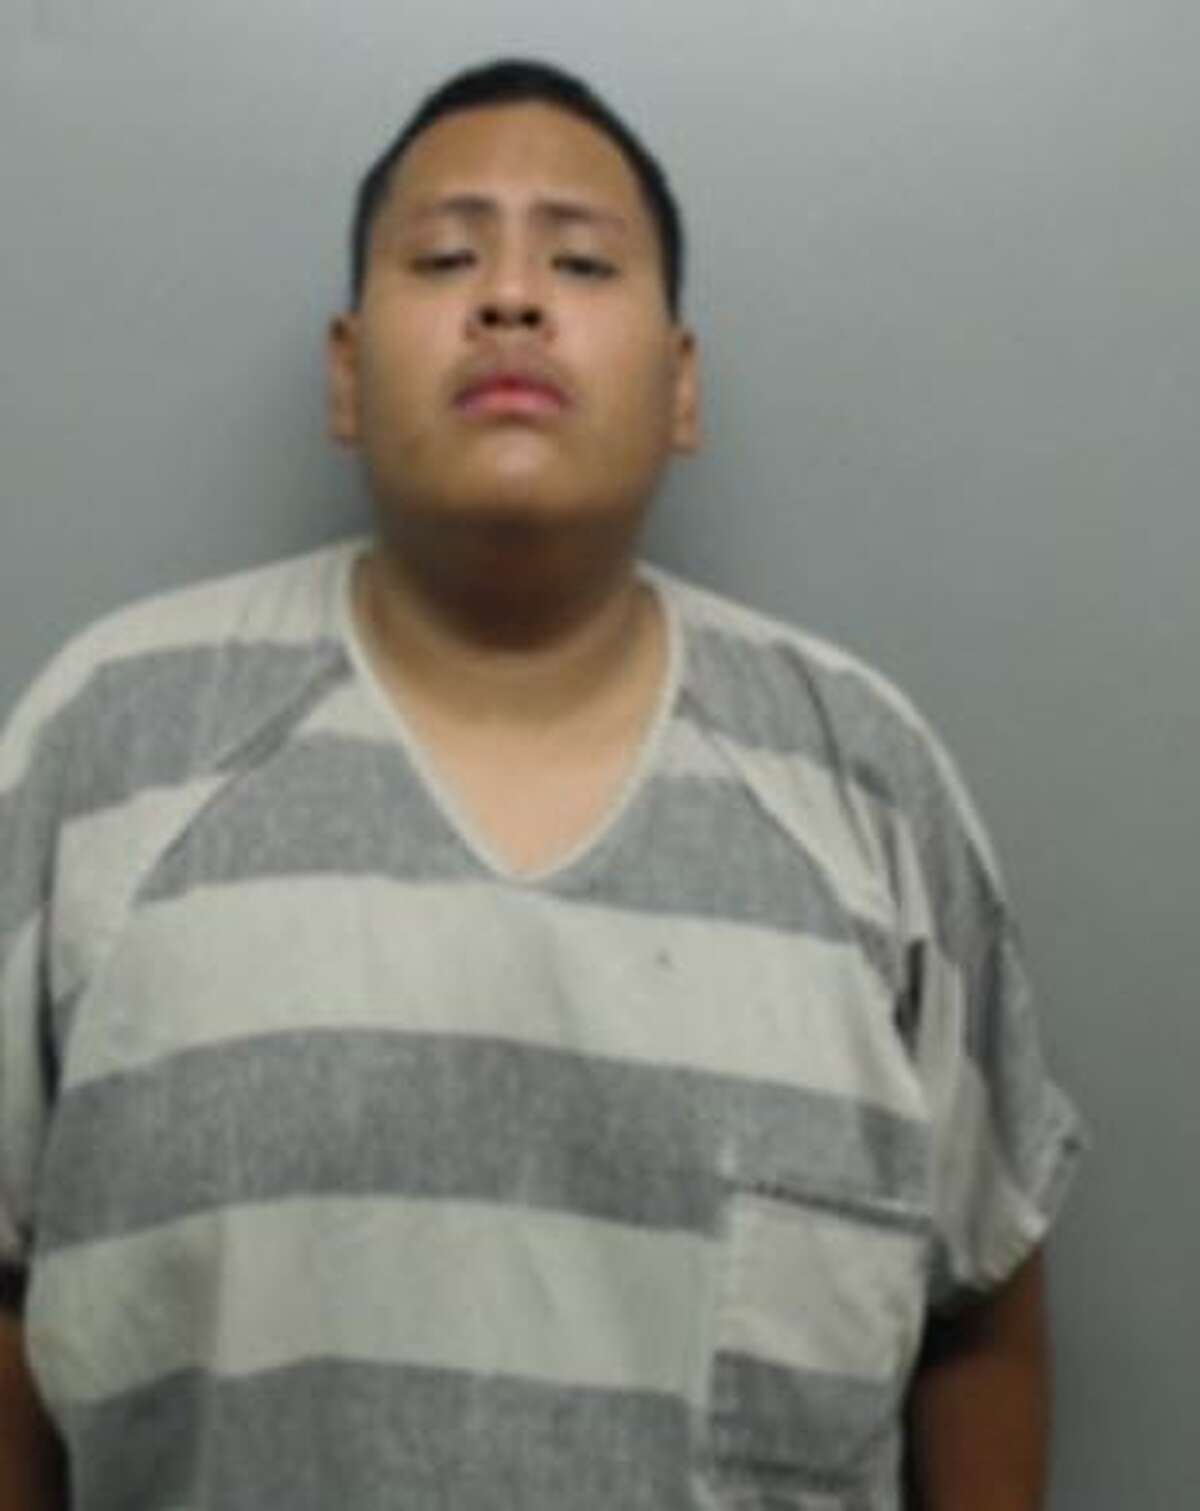 Edwin Reynaldo Puente, 18, was charged with criminal trespass.